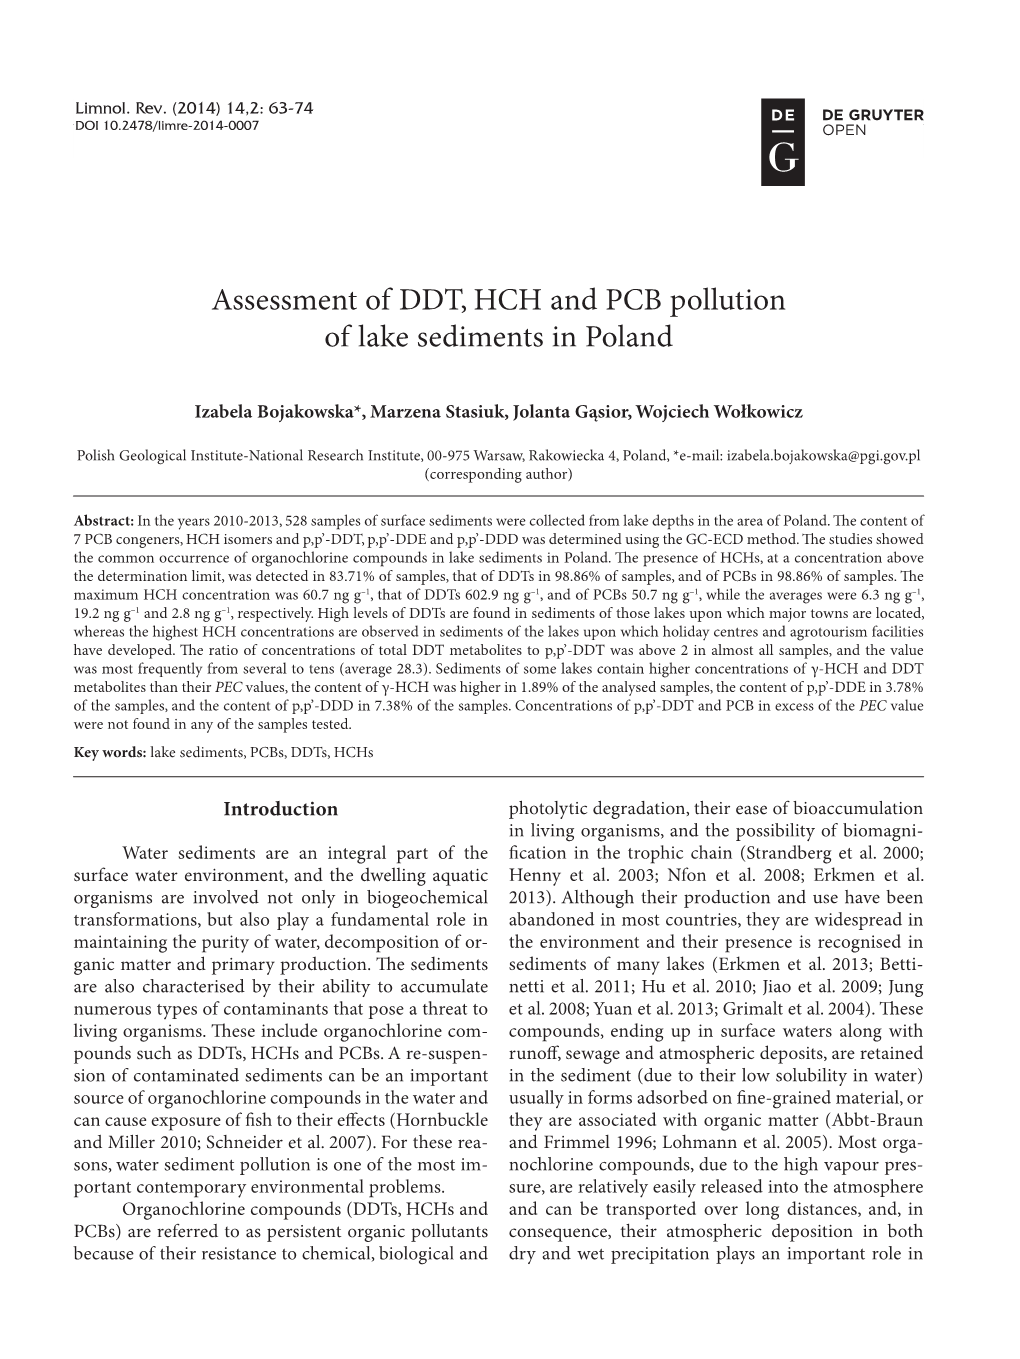 Assessment of DDT, HCH and PCB Pollution of Lake Sediments in Poland